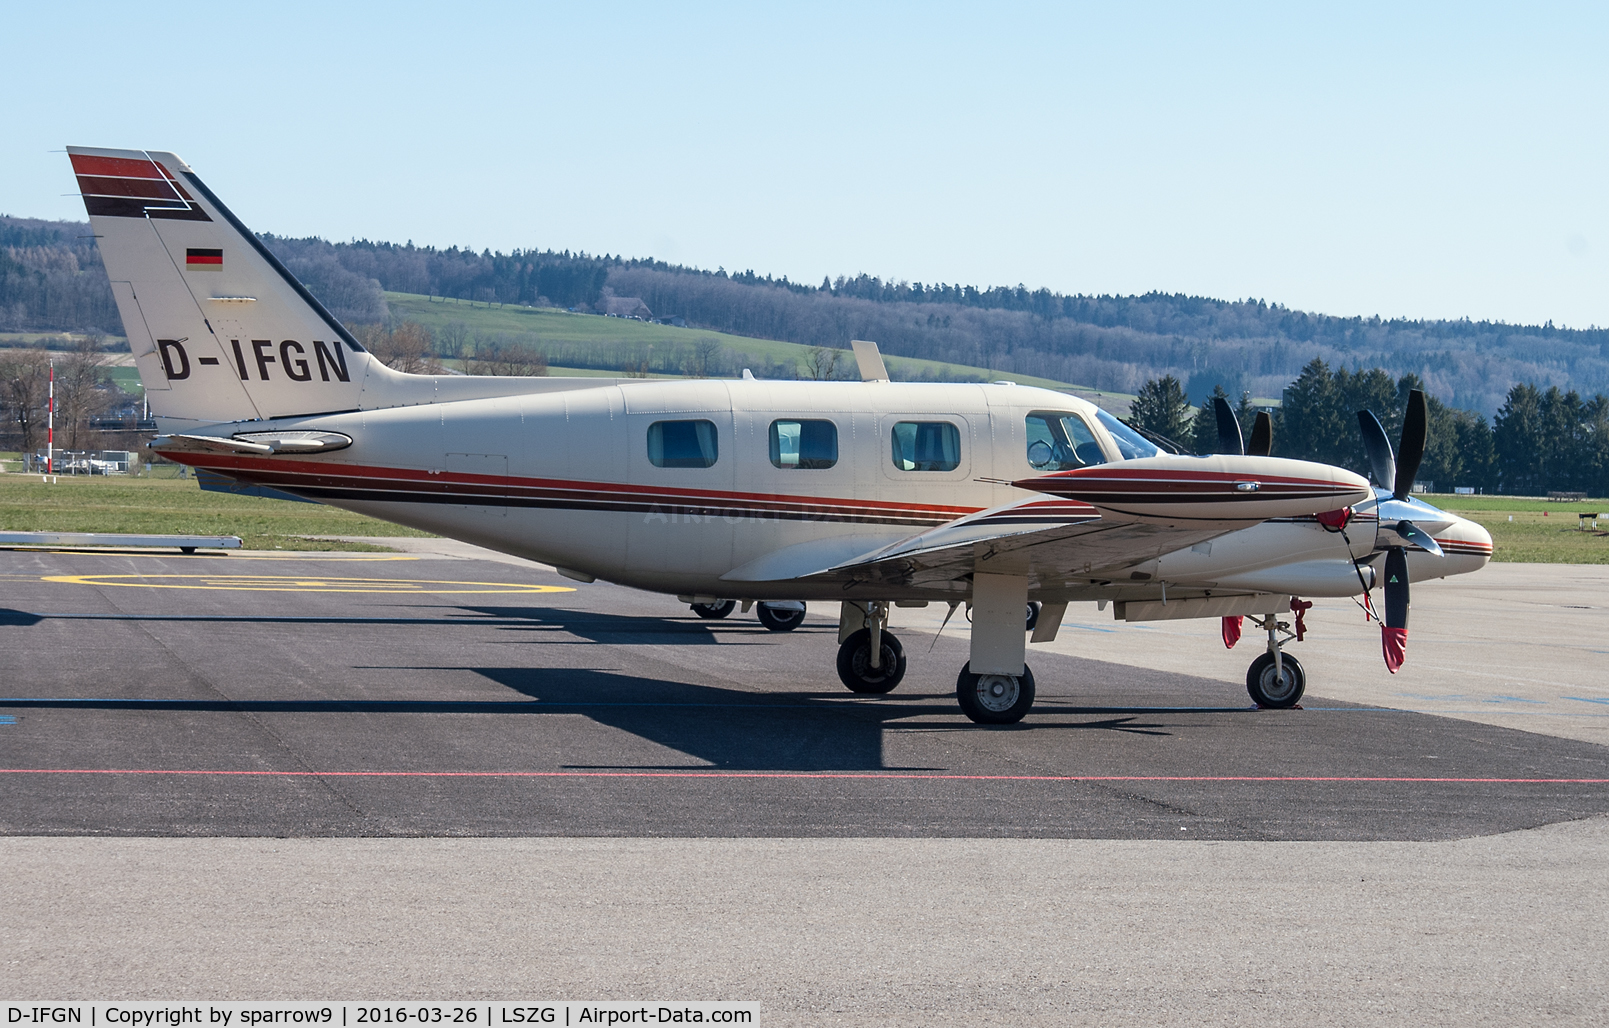 D-IFGN, 1982 Piper PA-31T-620 Cheyenne II C/N 31T-8120052, A regular guest at Grenchen since many years